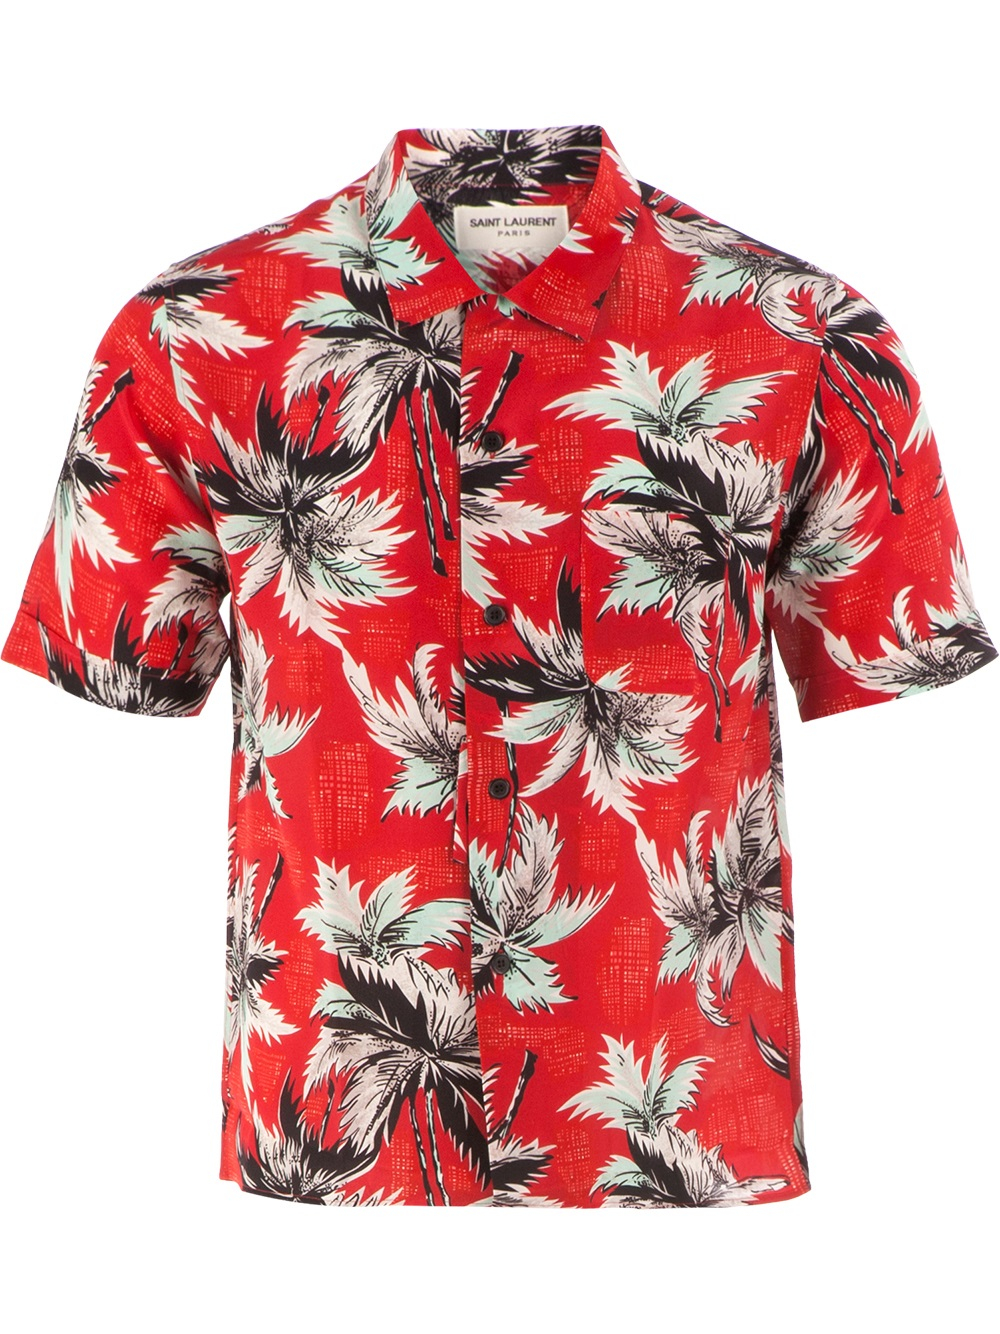 Saint laurent Palm Tree Printed Shirt in Red for Men | Lyst